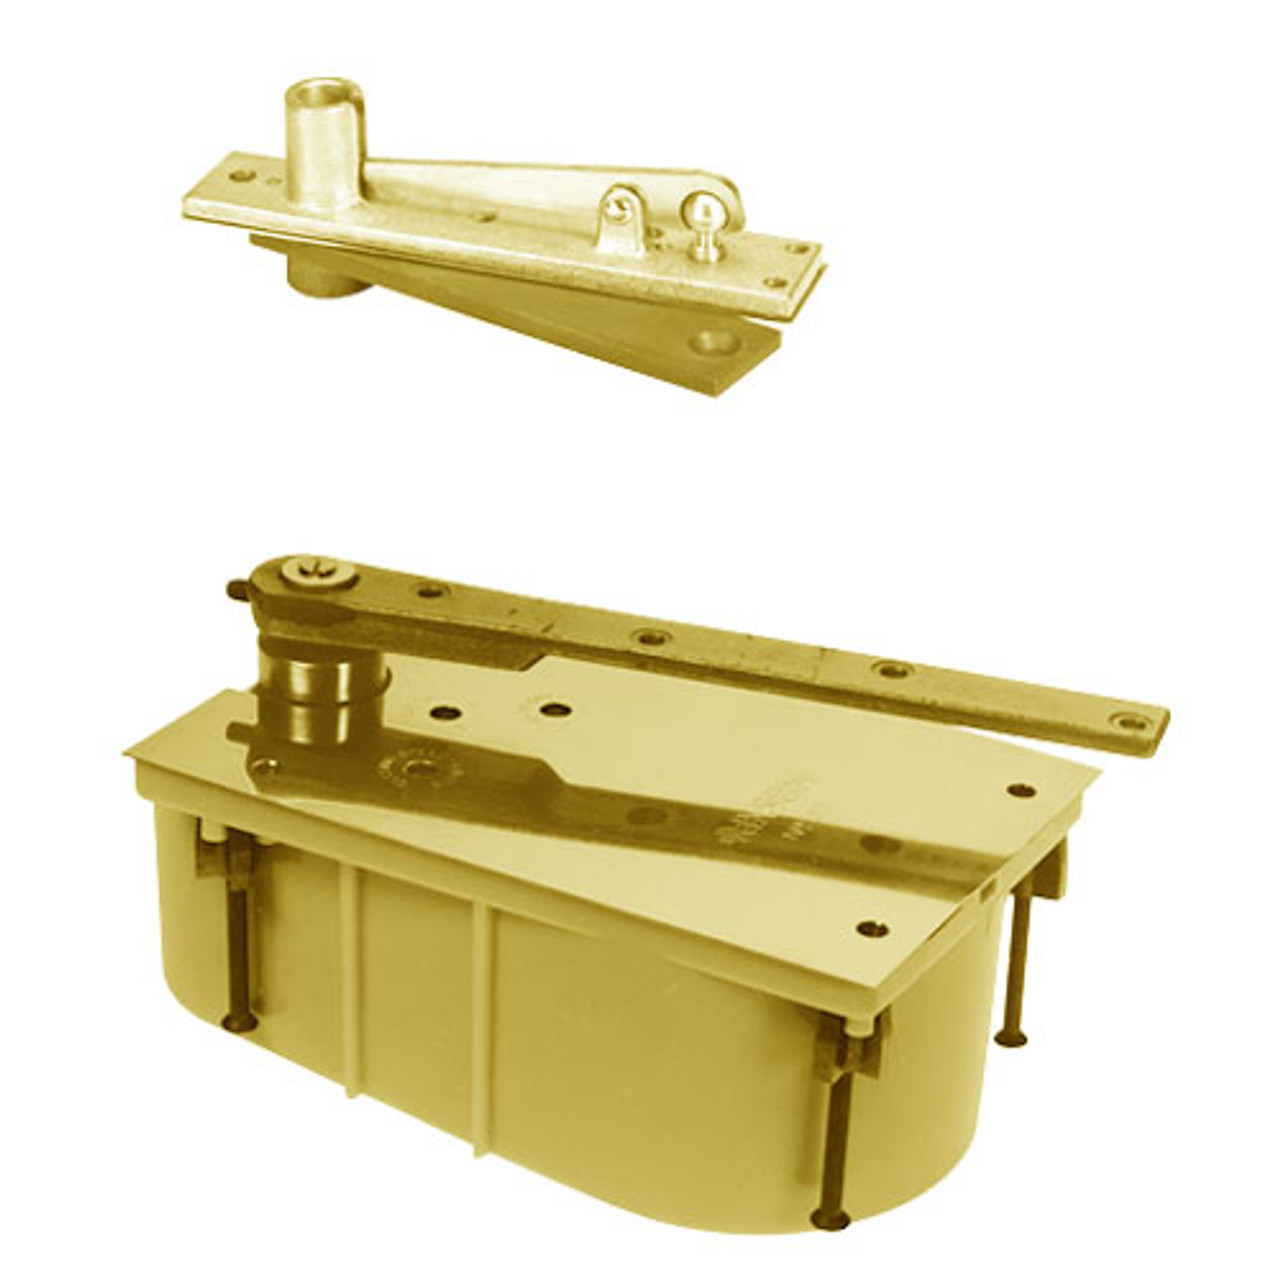 28-95N-554-LFP-CWF-LH-605 Rixson 28 Series Heavy Duty Single Acting Center Hung Floor Closer with Concealed Arm in Bright Brass Finish